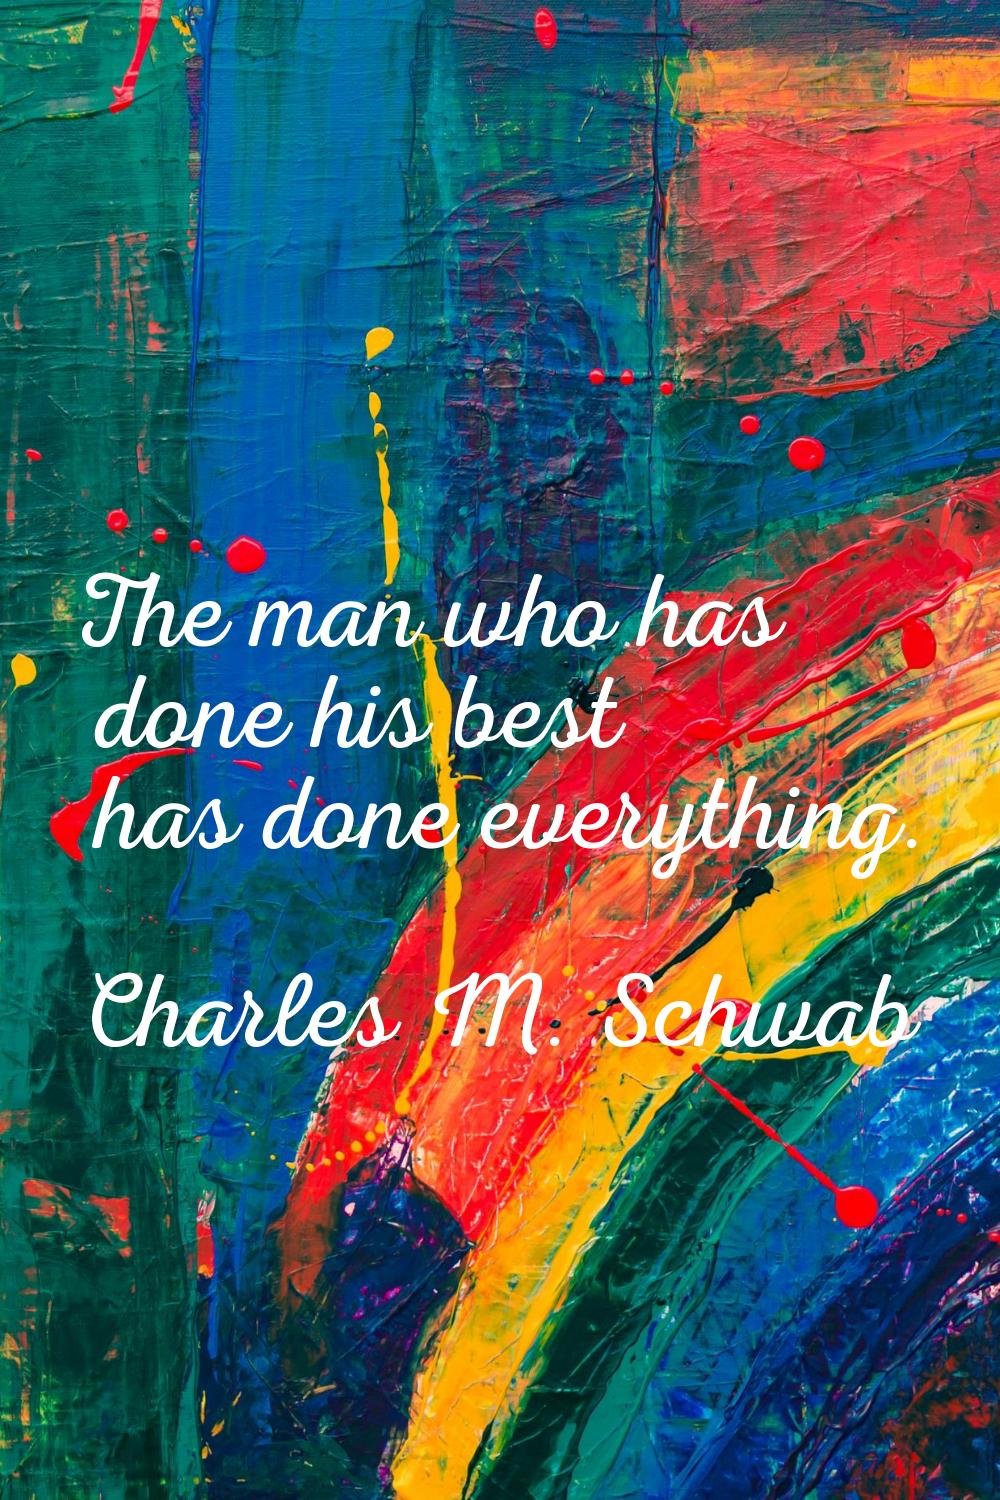 The man who has done his best has done everything.